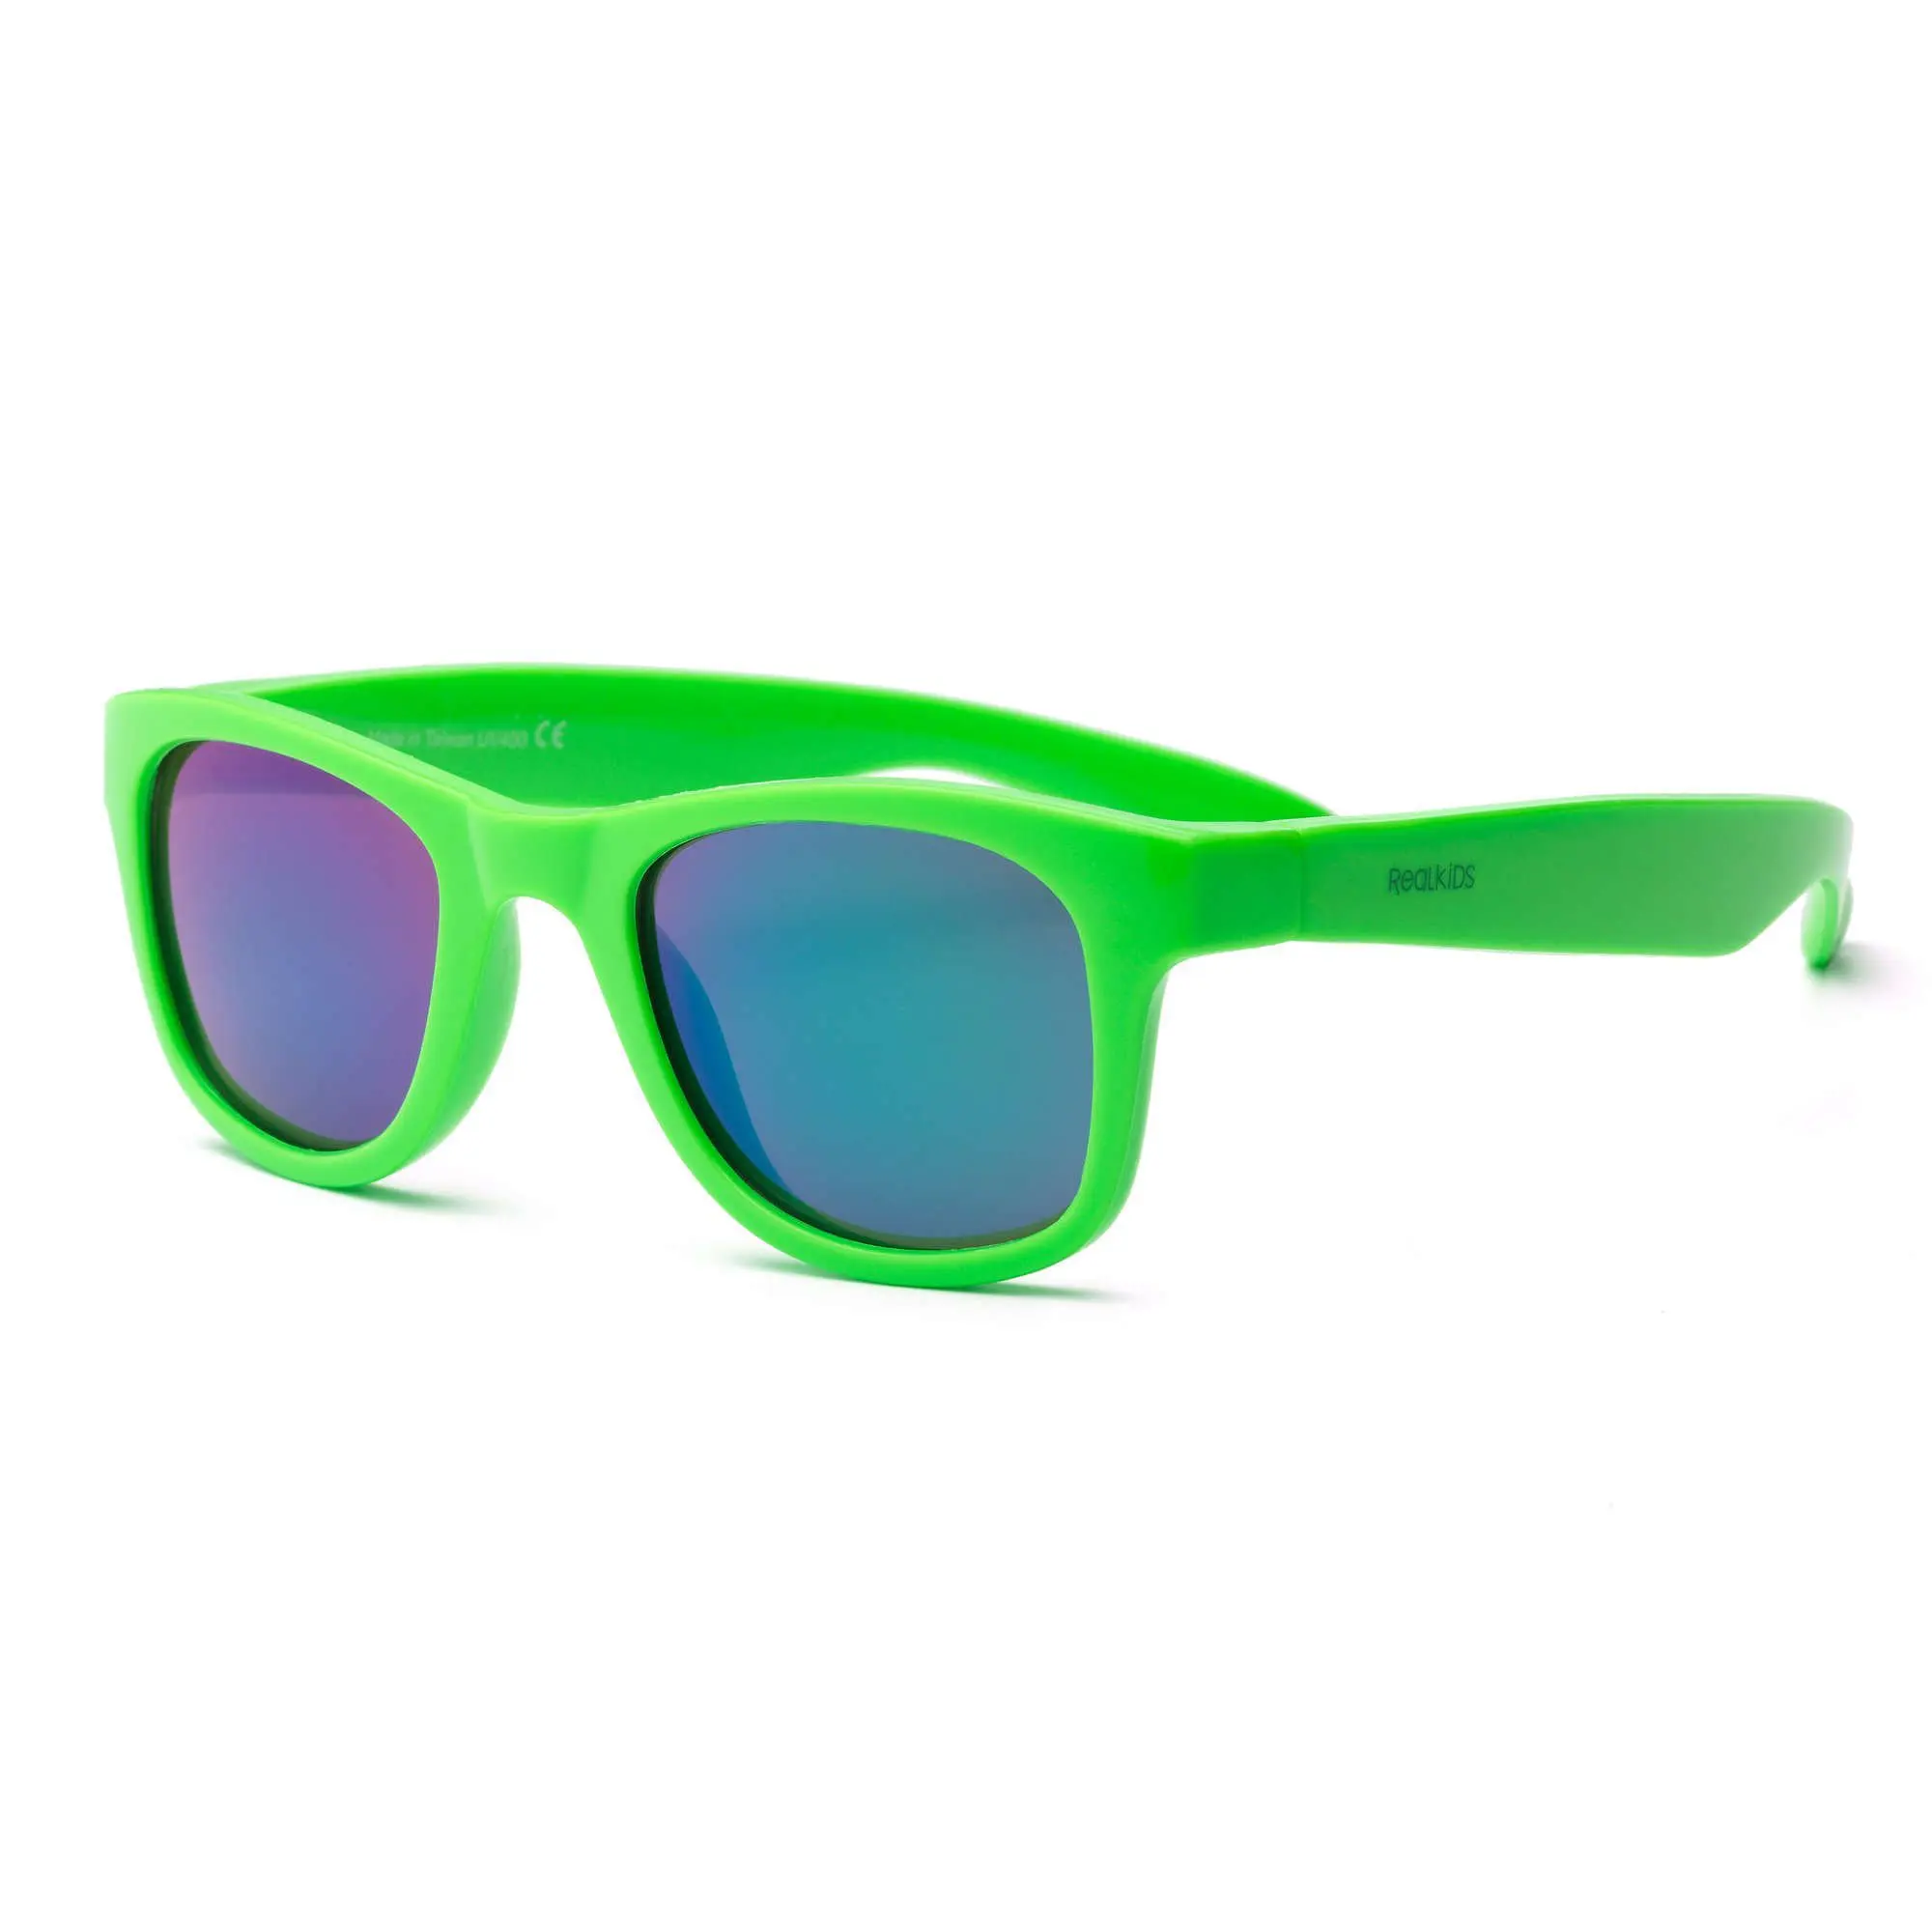 Stylish Kids Sunglasses: Surf Sunglasses for Kids from Real Shades